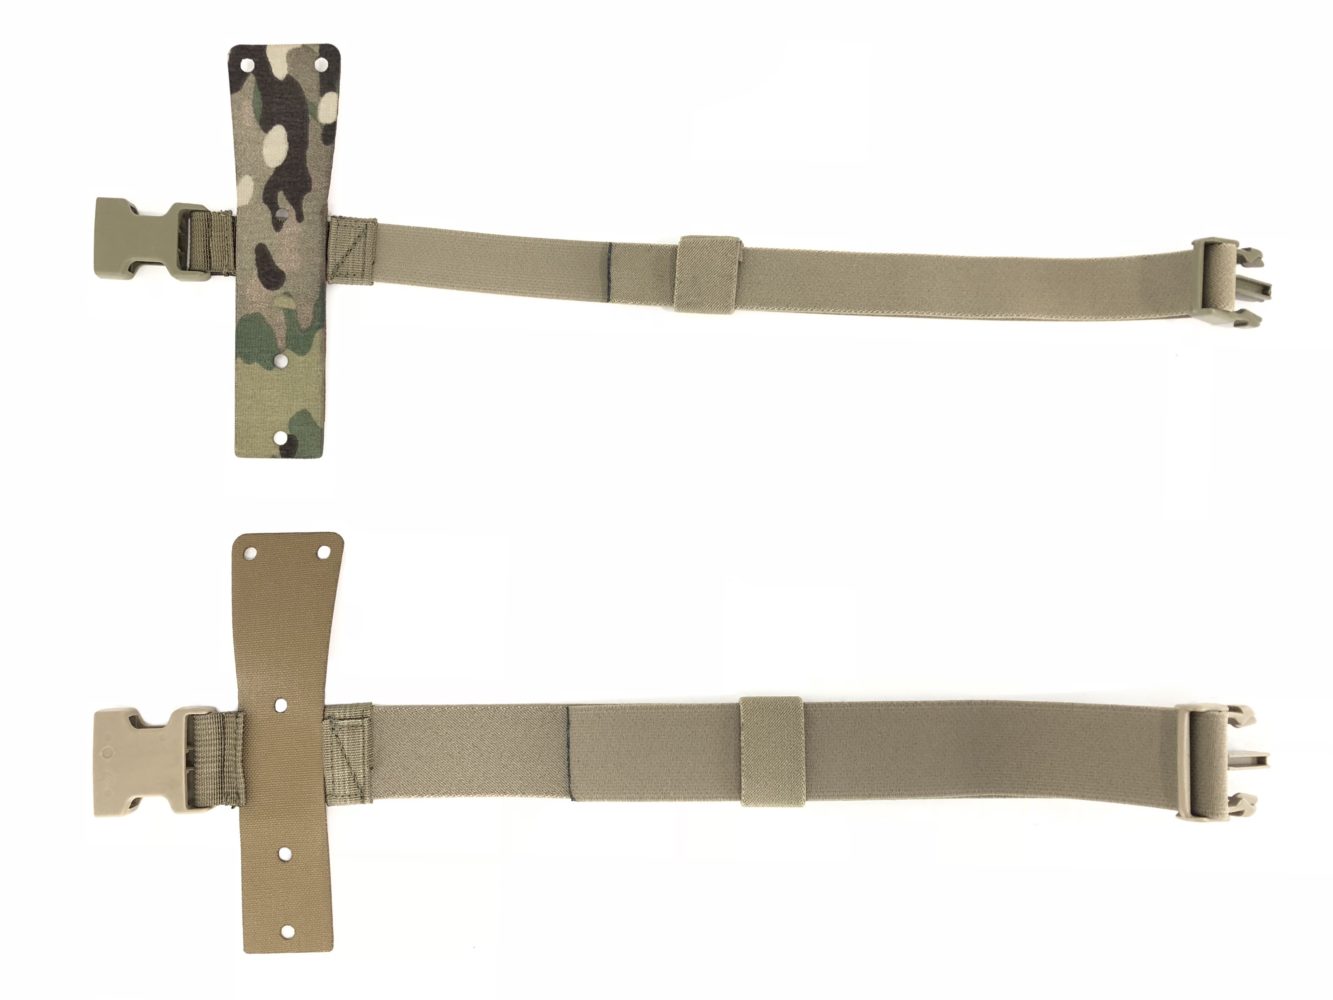 New from Arbor Arms USA – Safariland Holster Single Leg Strap Adapter